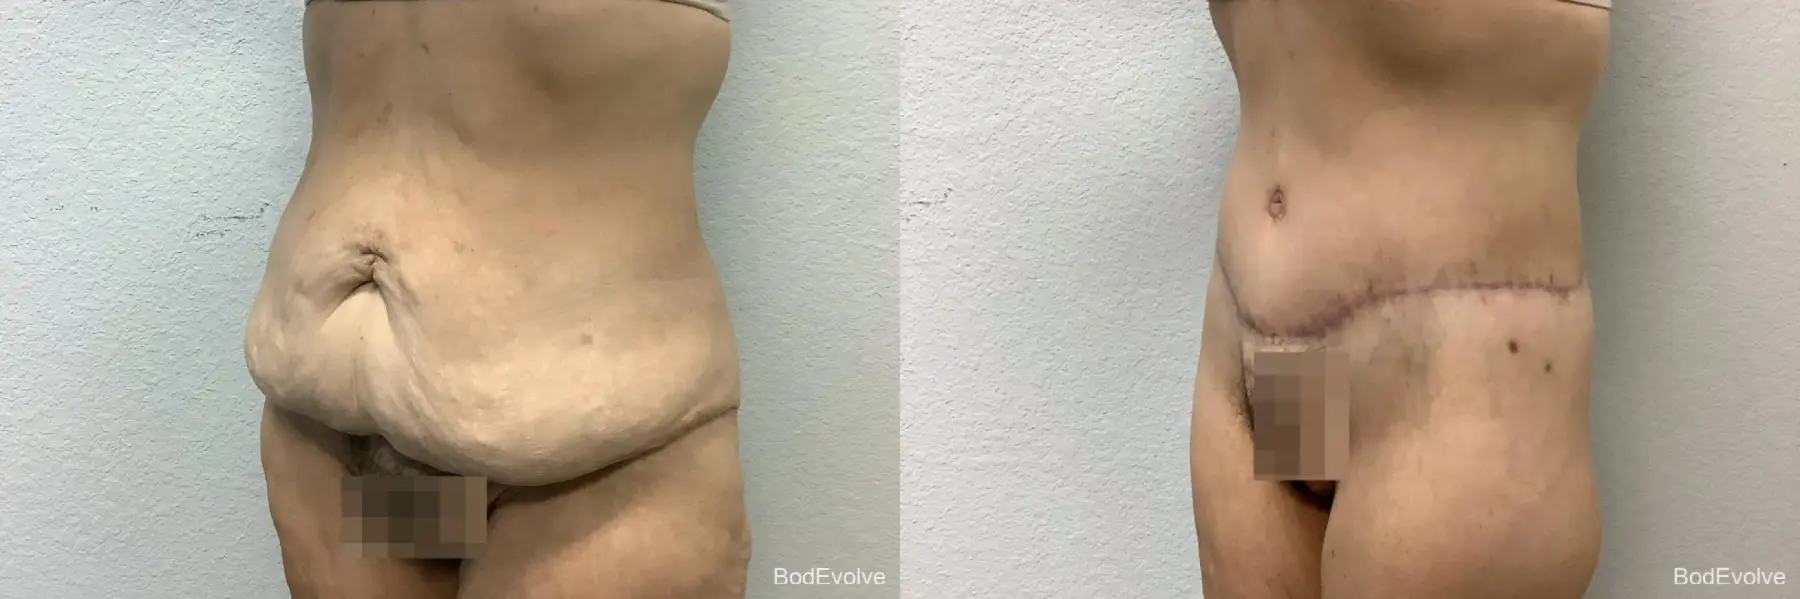 Body Lift: Patient 2 - Before and After 2